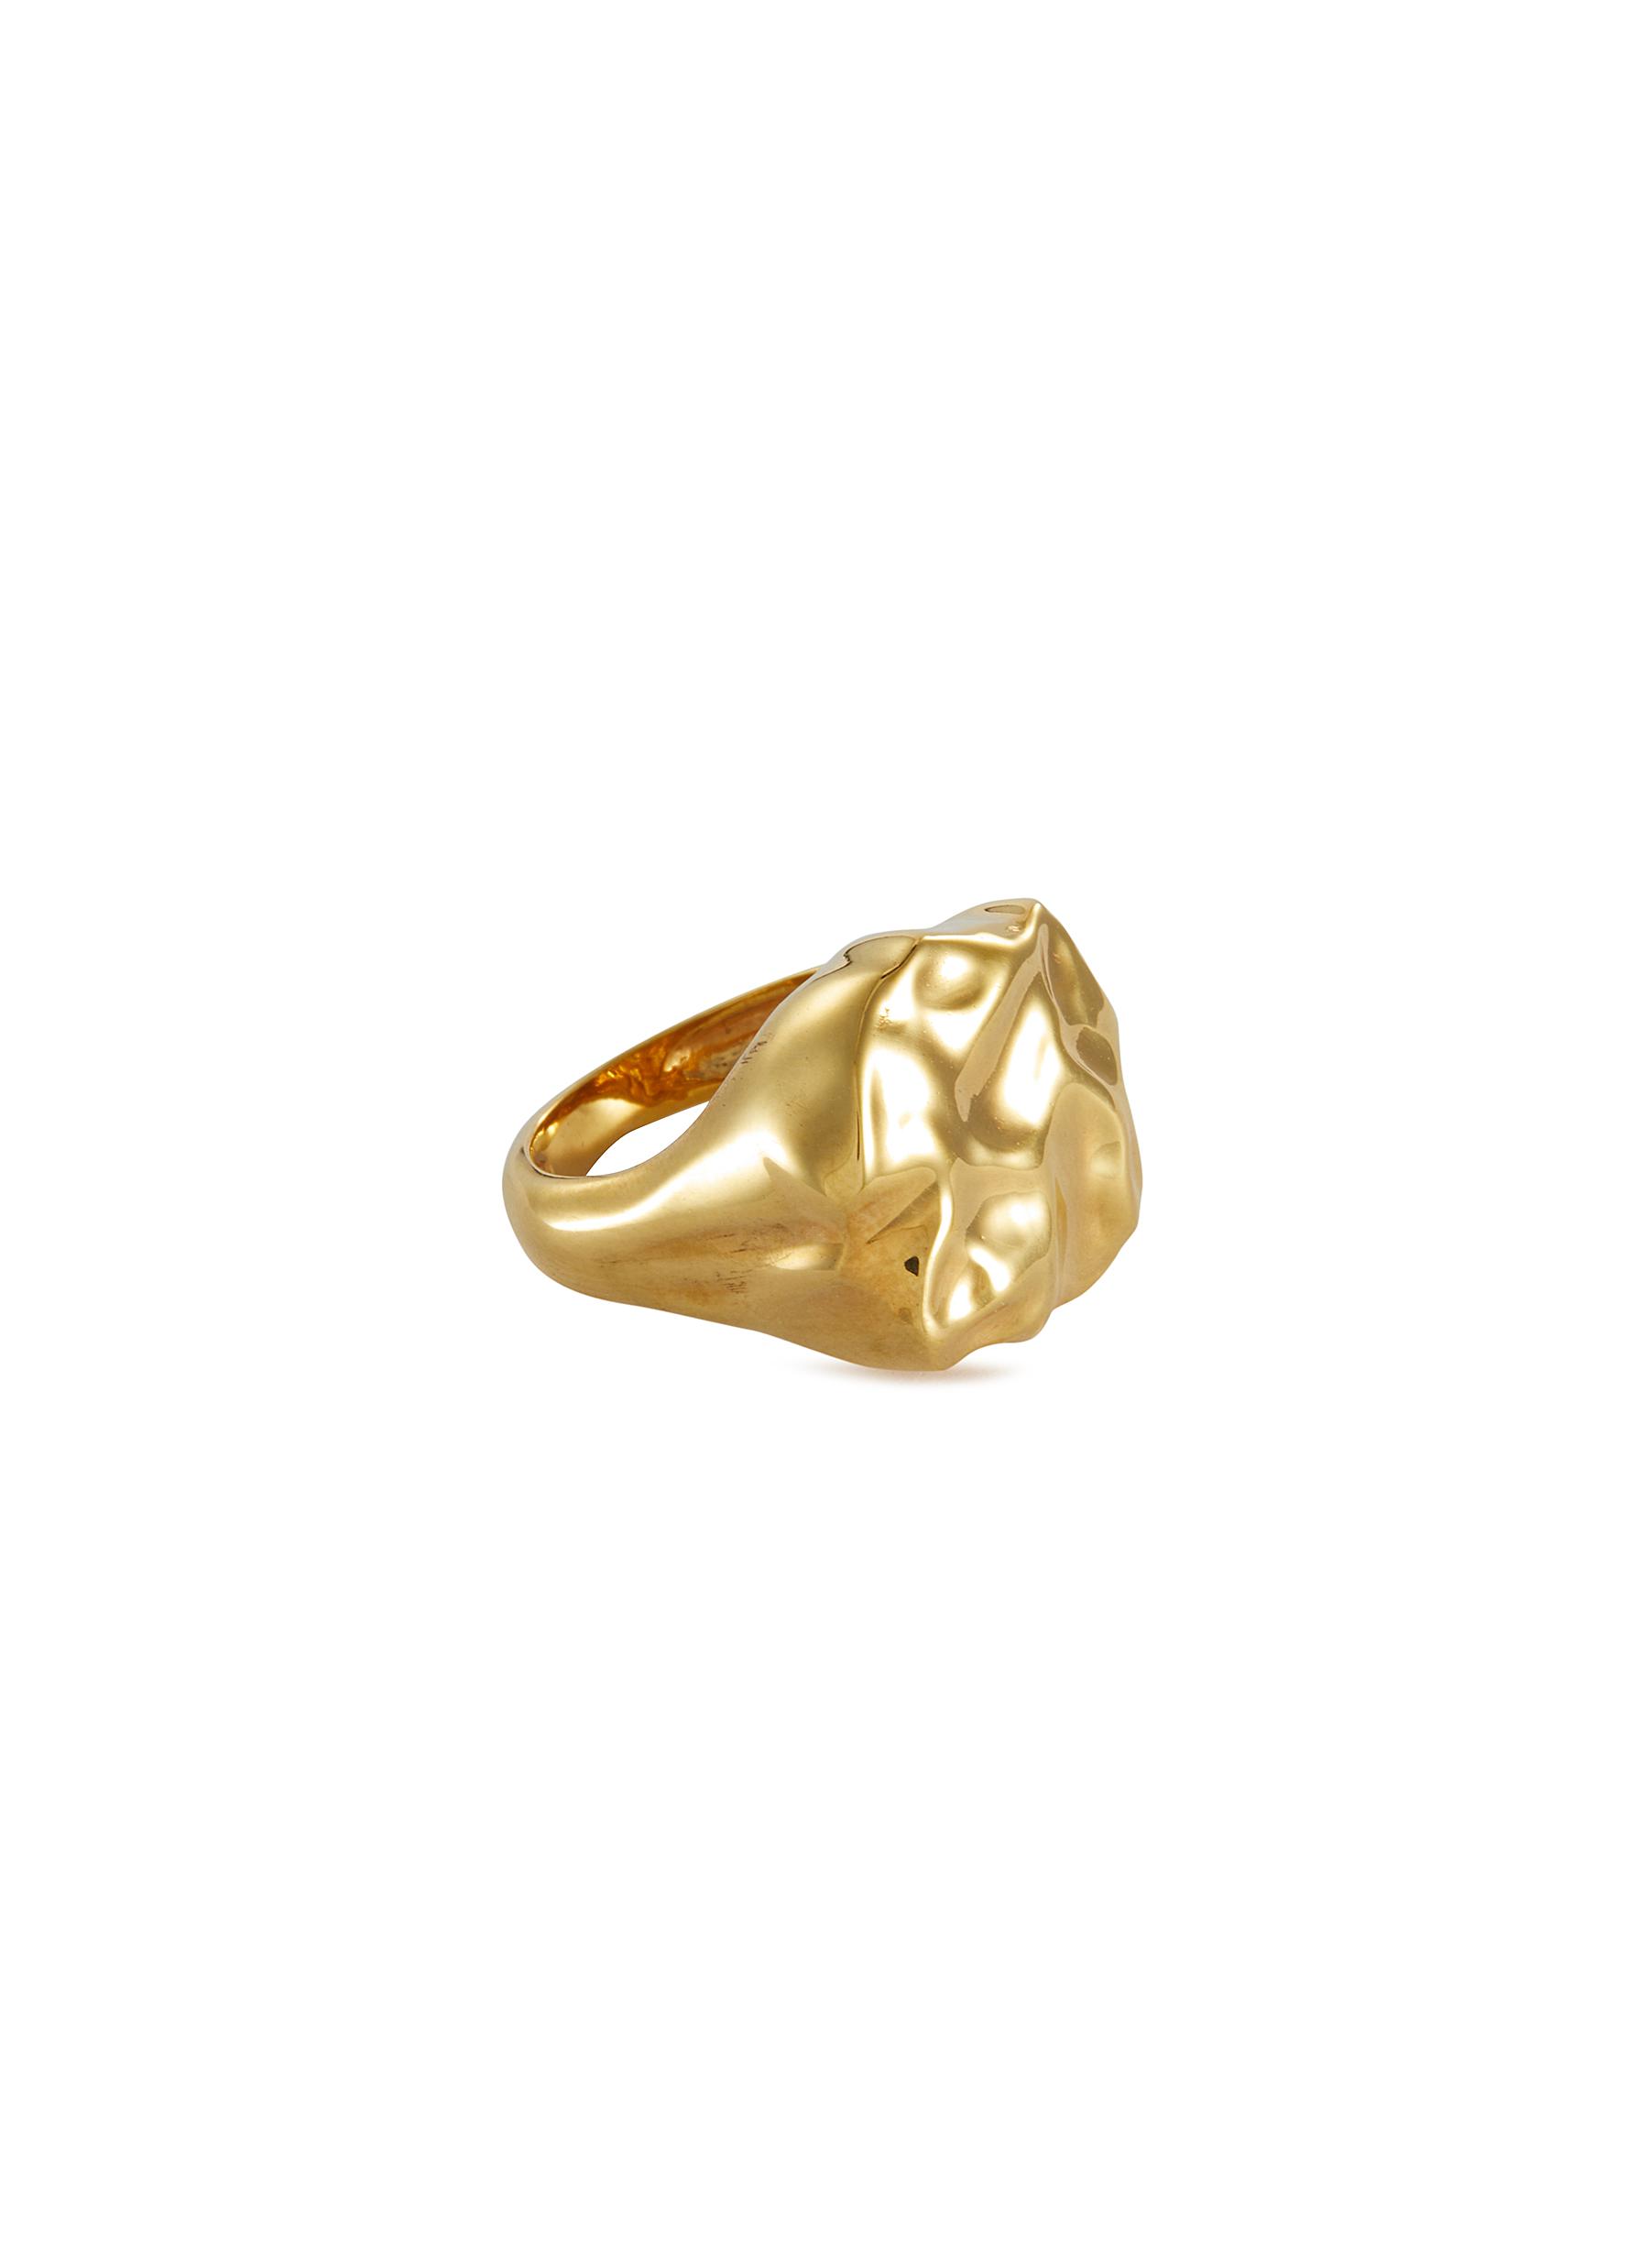 JOANNA LAURA CONSTANTINE 'Feminine Waves' Uneven Surface Gold-plated Signet Ring